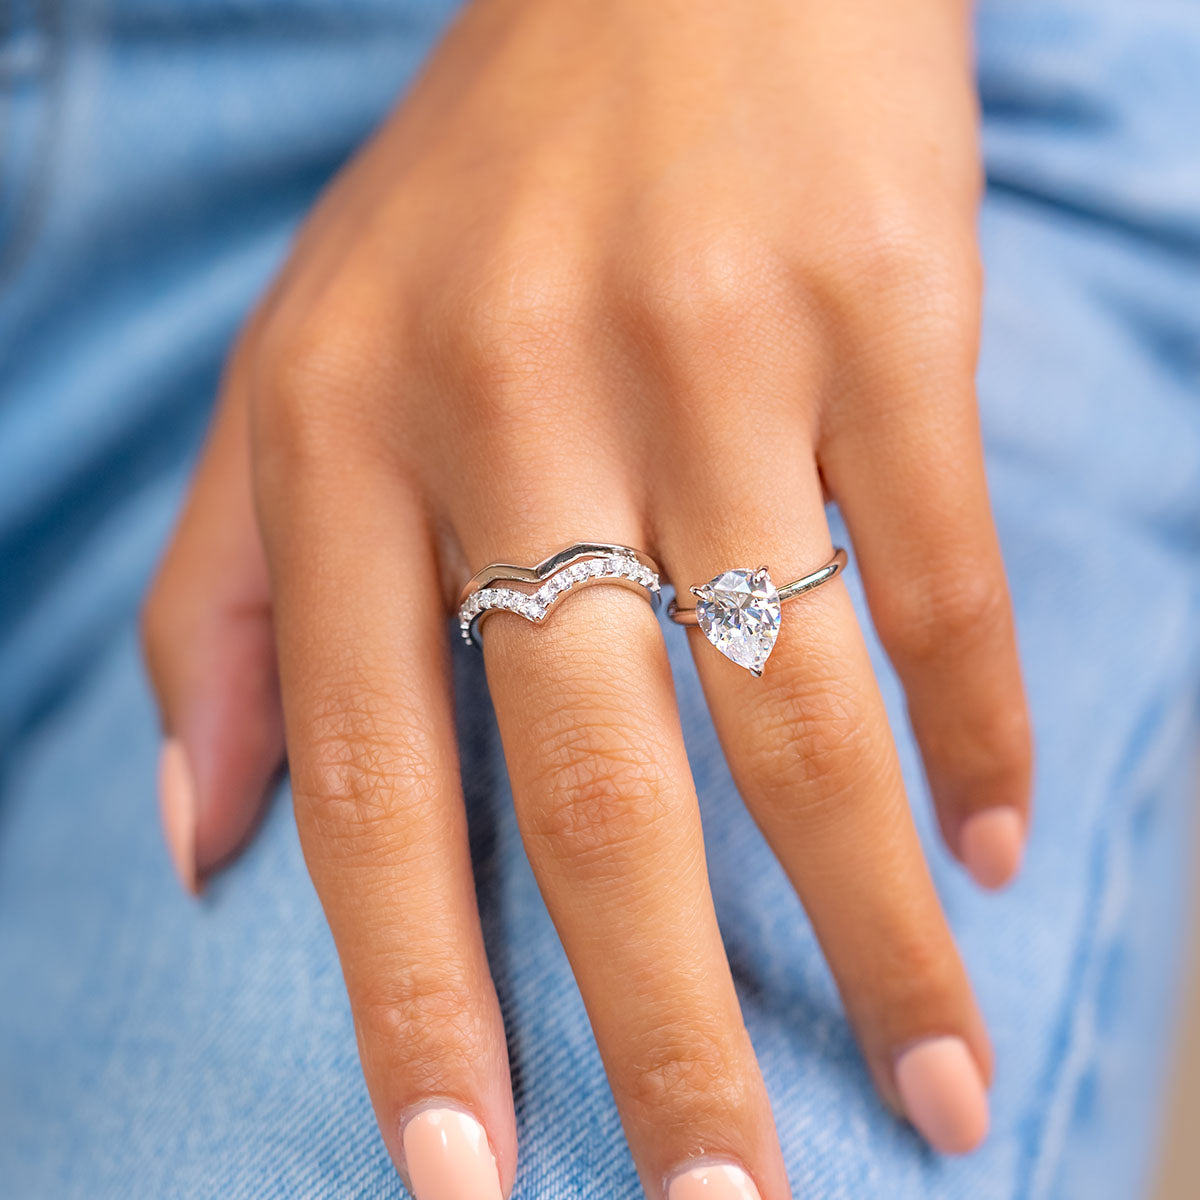 Female hand wearing sterling silver engagement ring